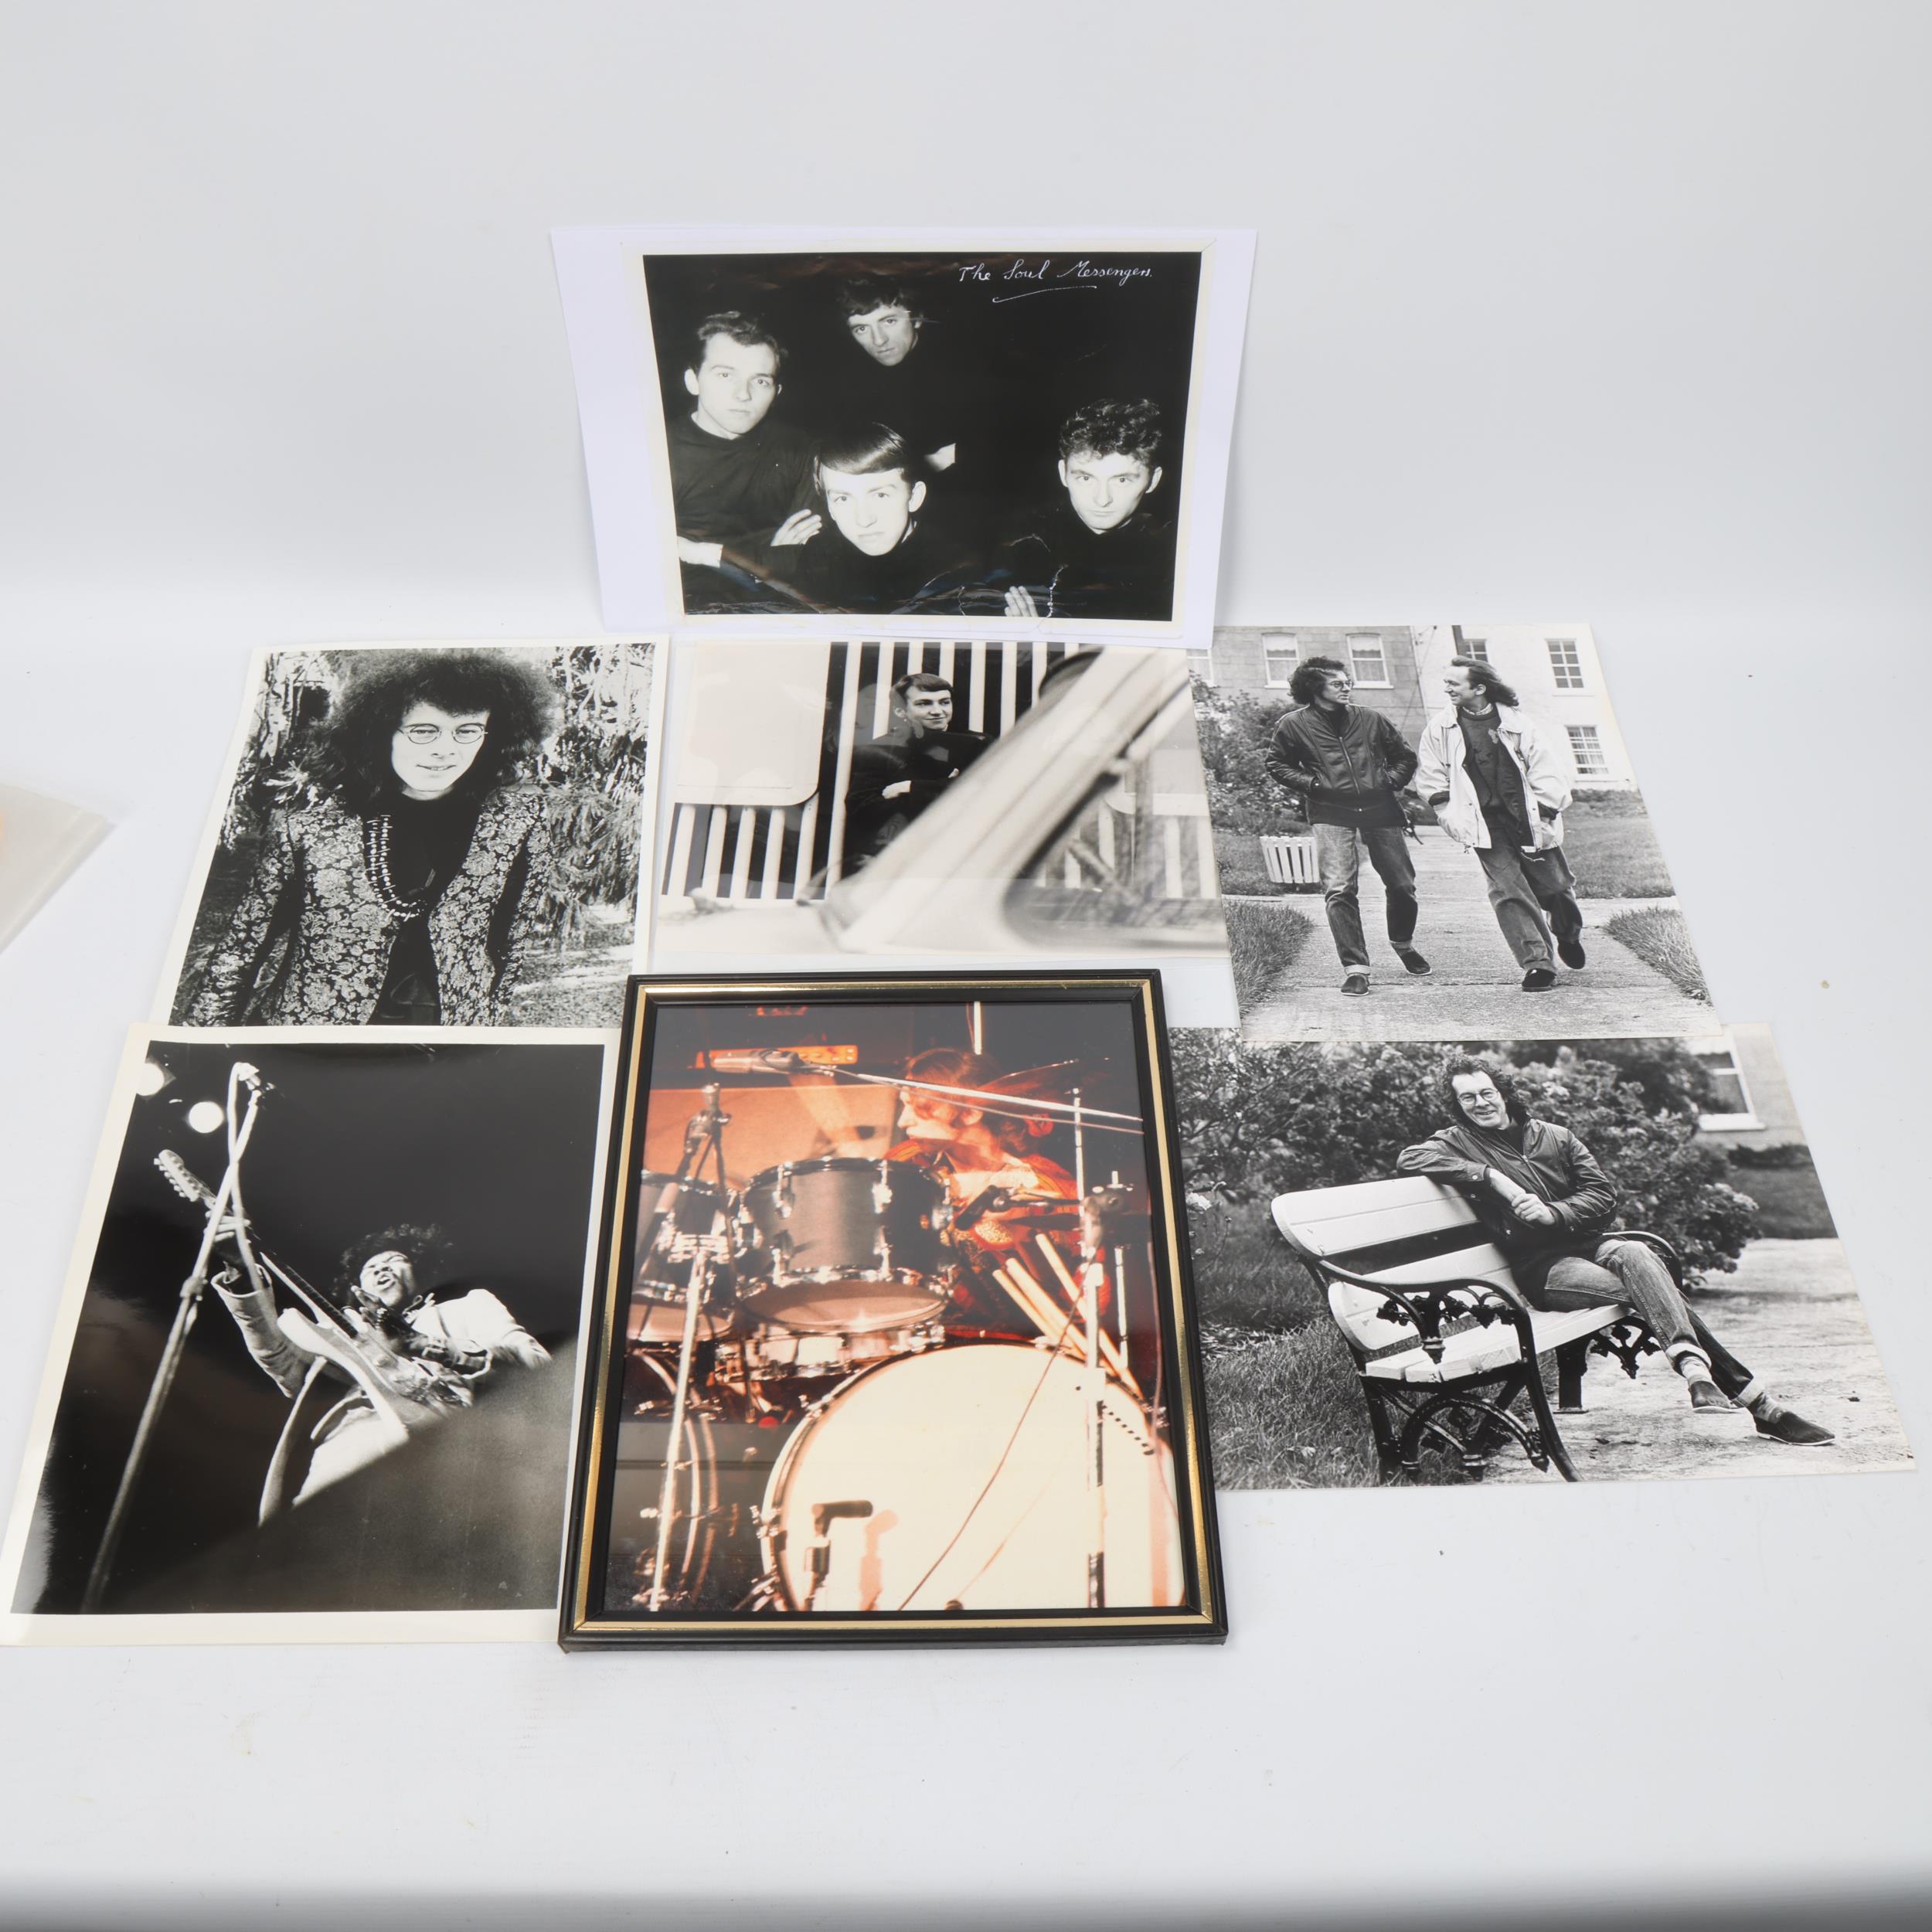 JIMI HENDRIX / MITCH MITCHELL. A Quantity of PHOTOGRAPHS & PRINTS. Two CDRs of images included in - Image 3 of 3